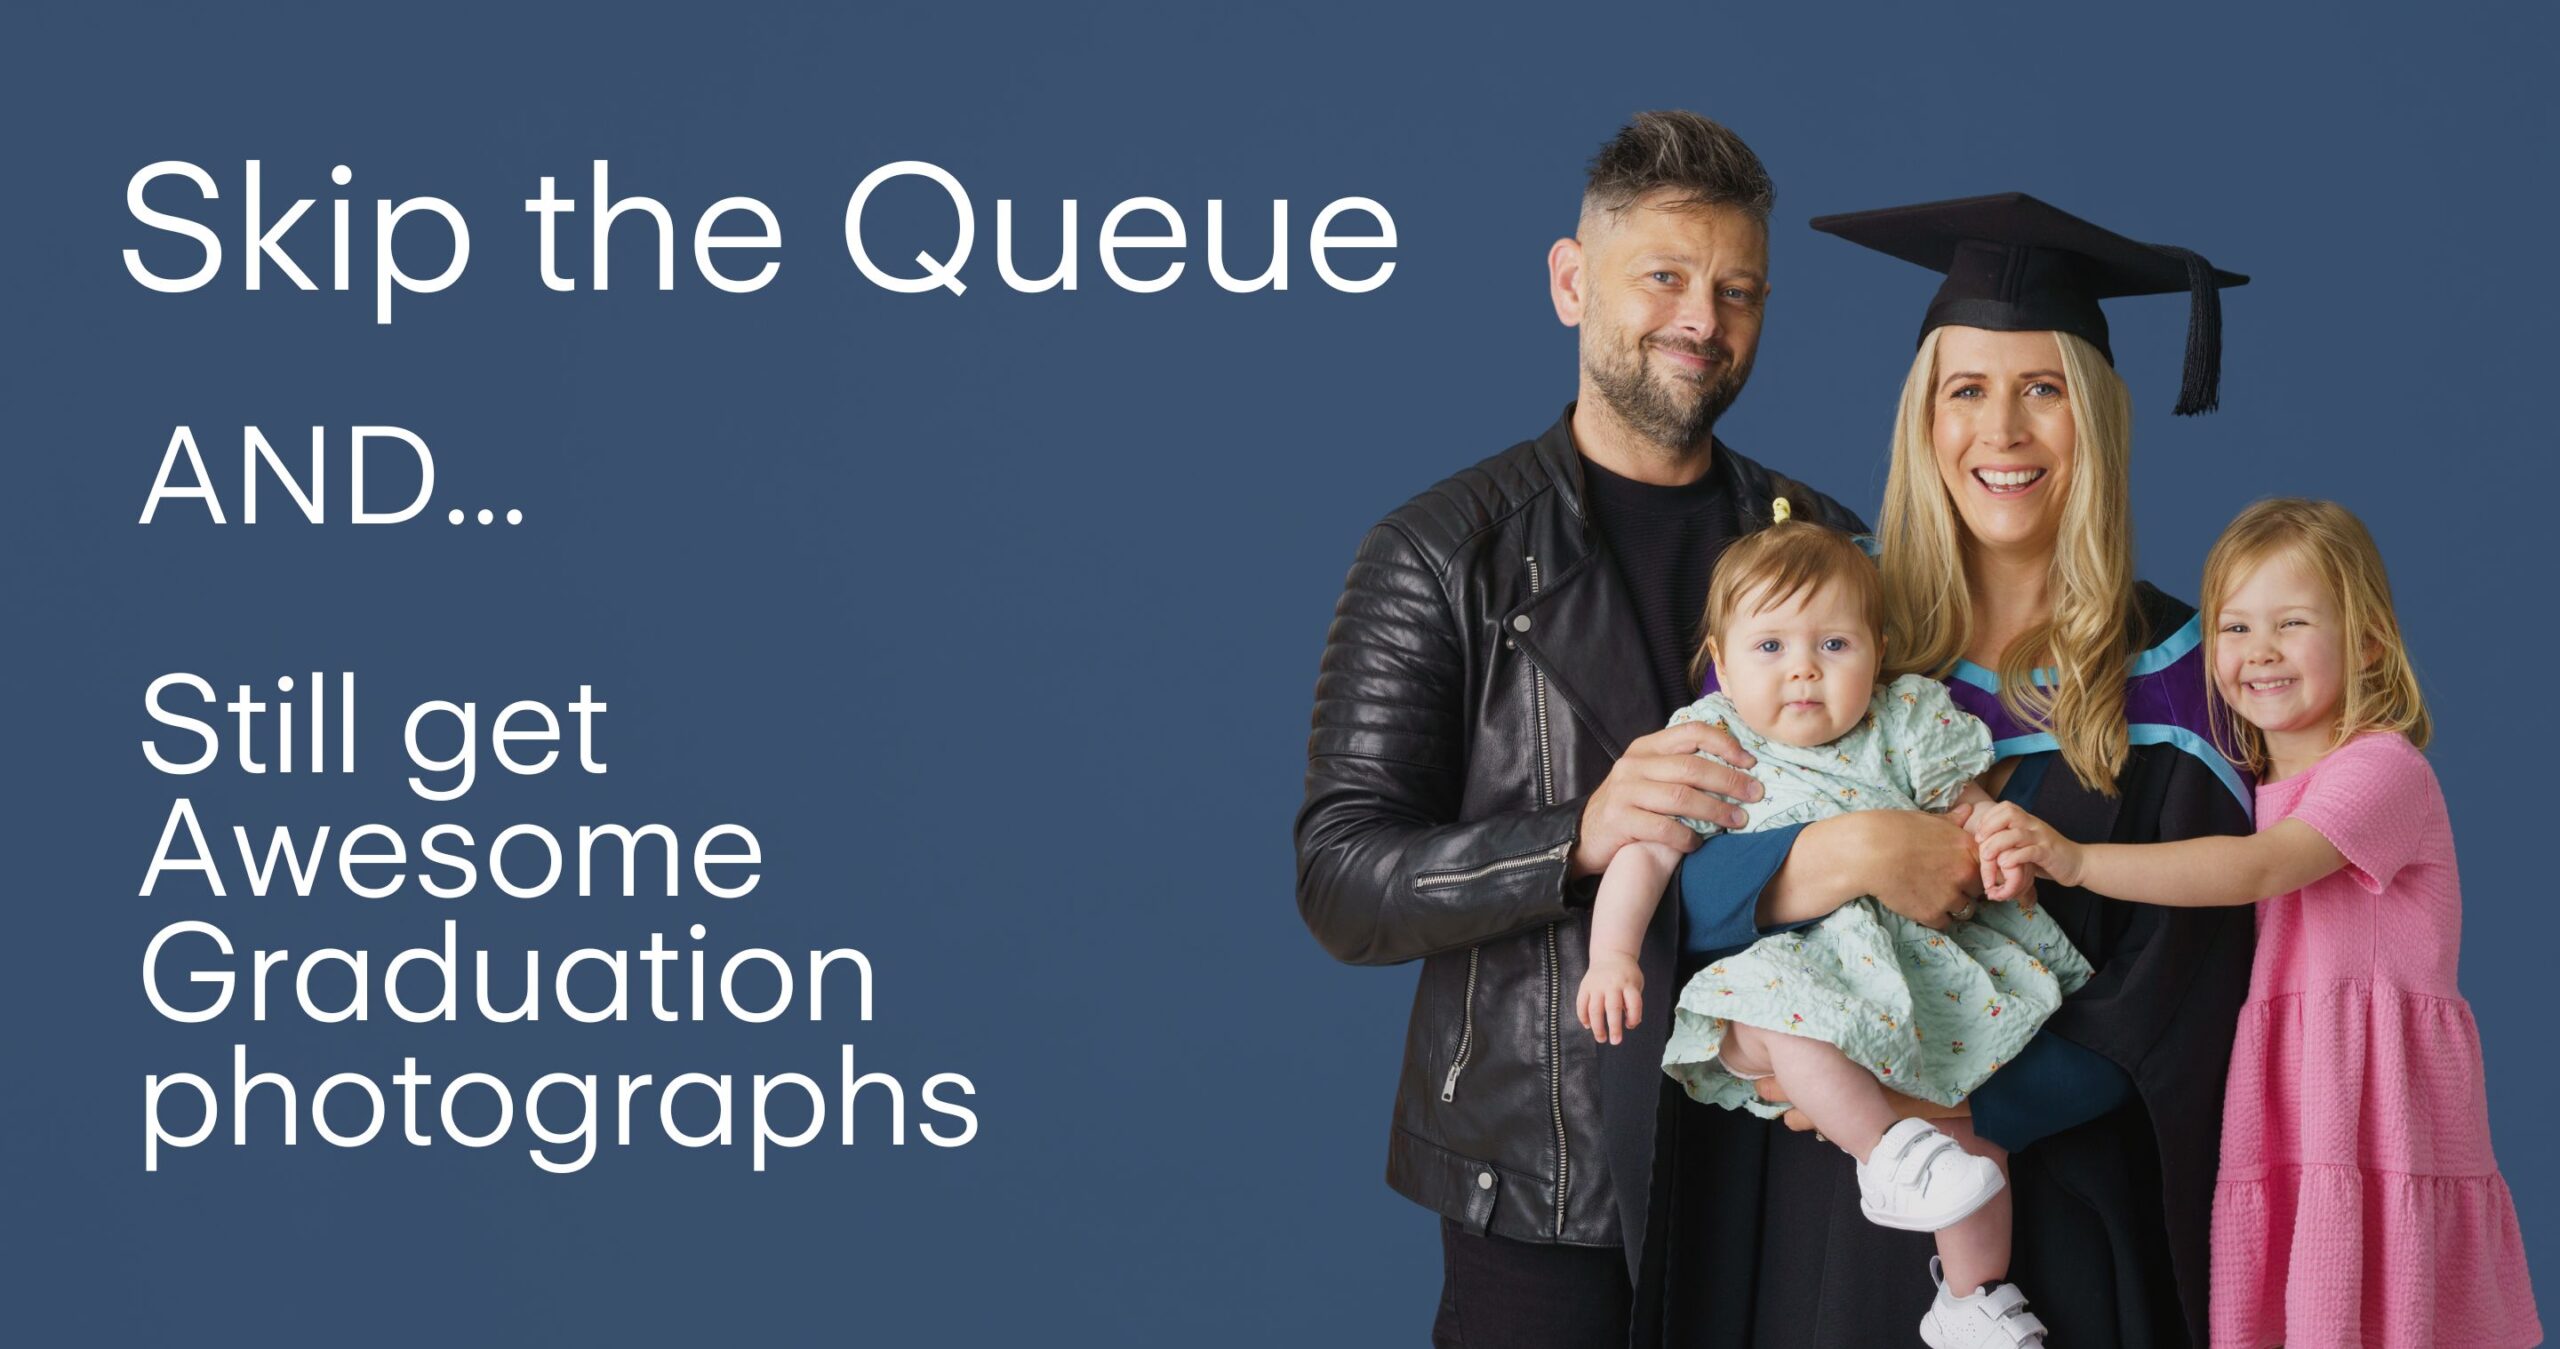 Professional Graduation photograph taken by Northern Ireland's top Graduation photographer in Belfast of a a female graduate with her husband and 2 children on a navy blue backdrop